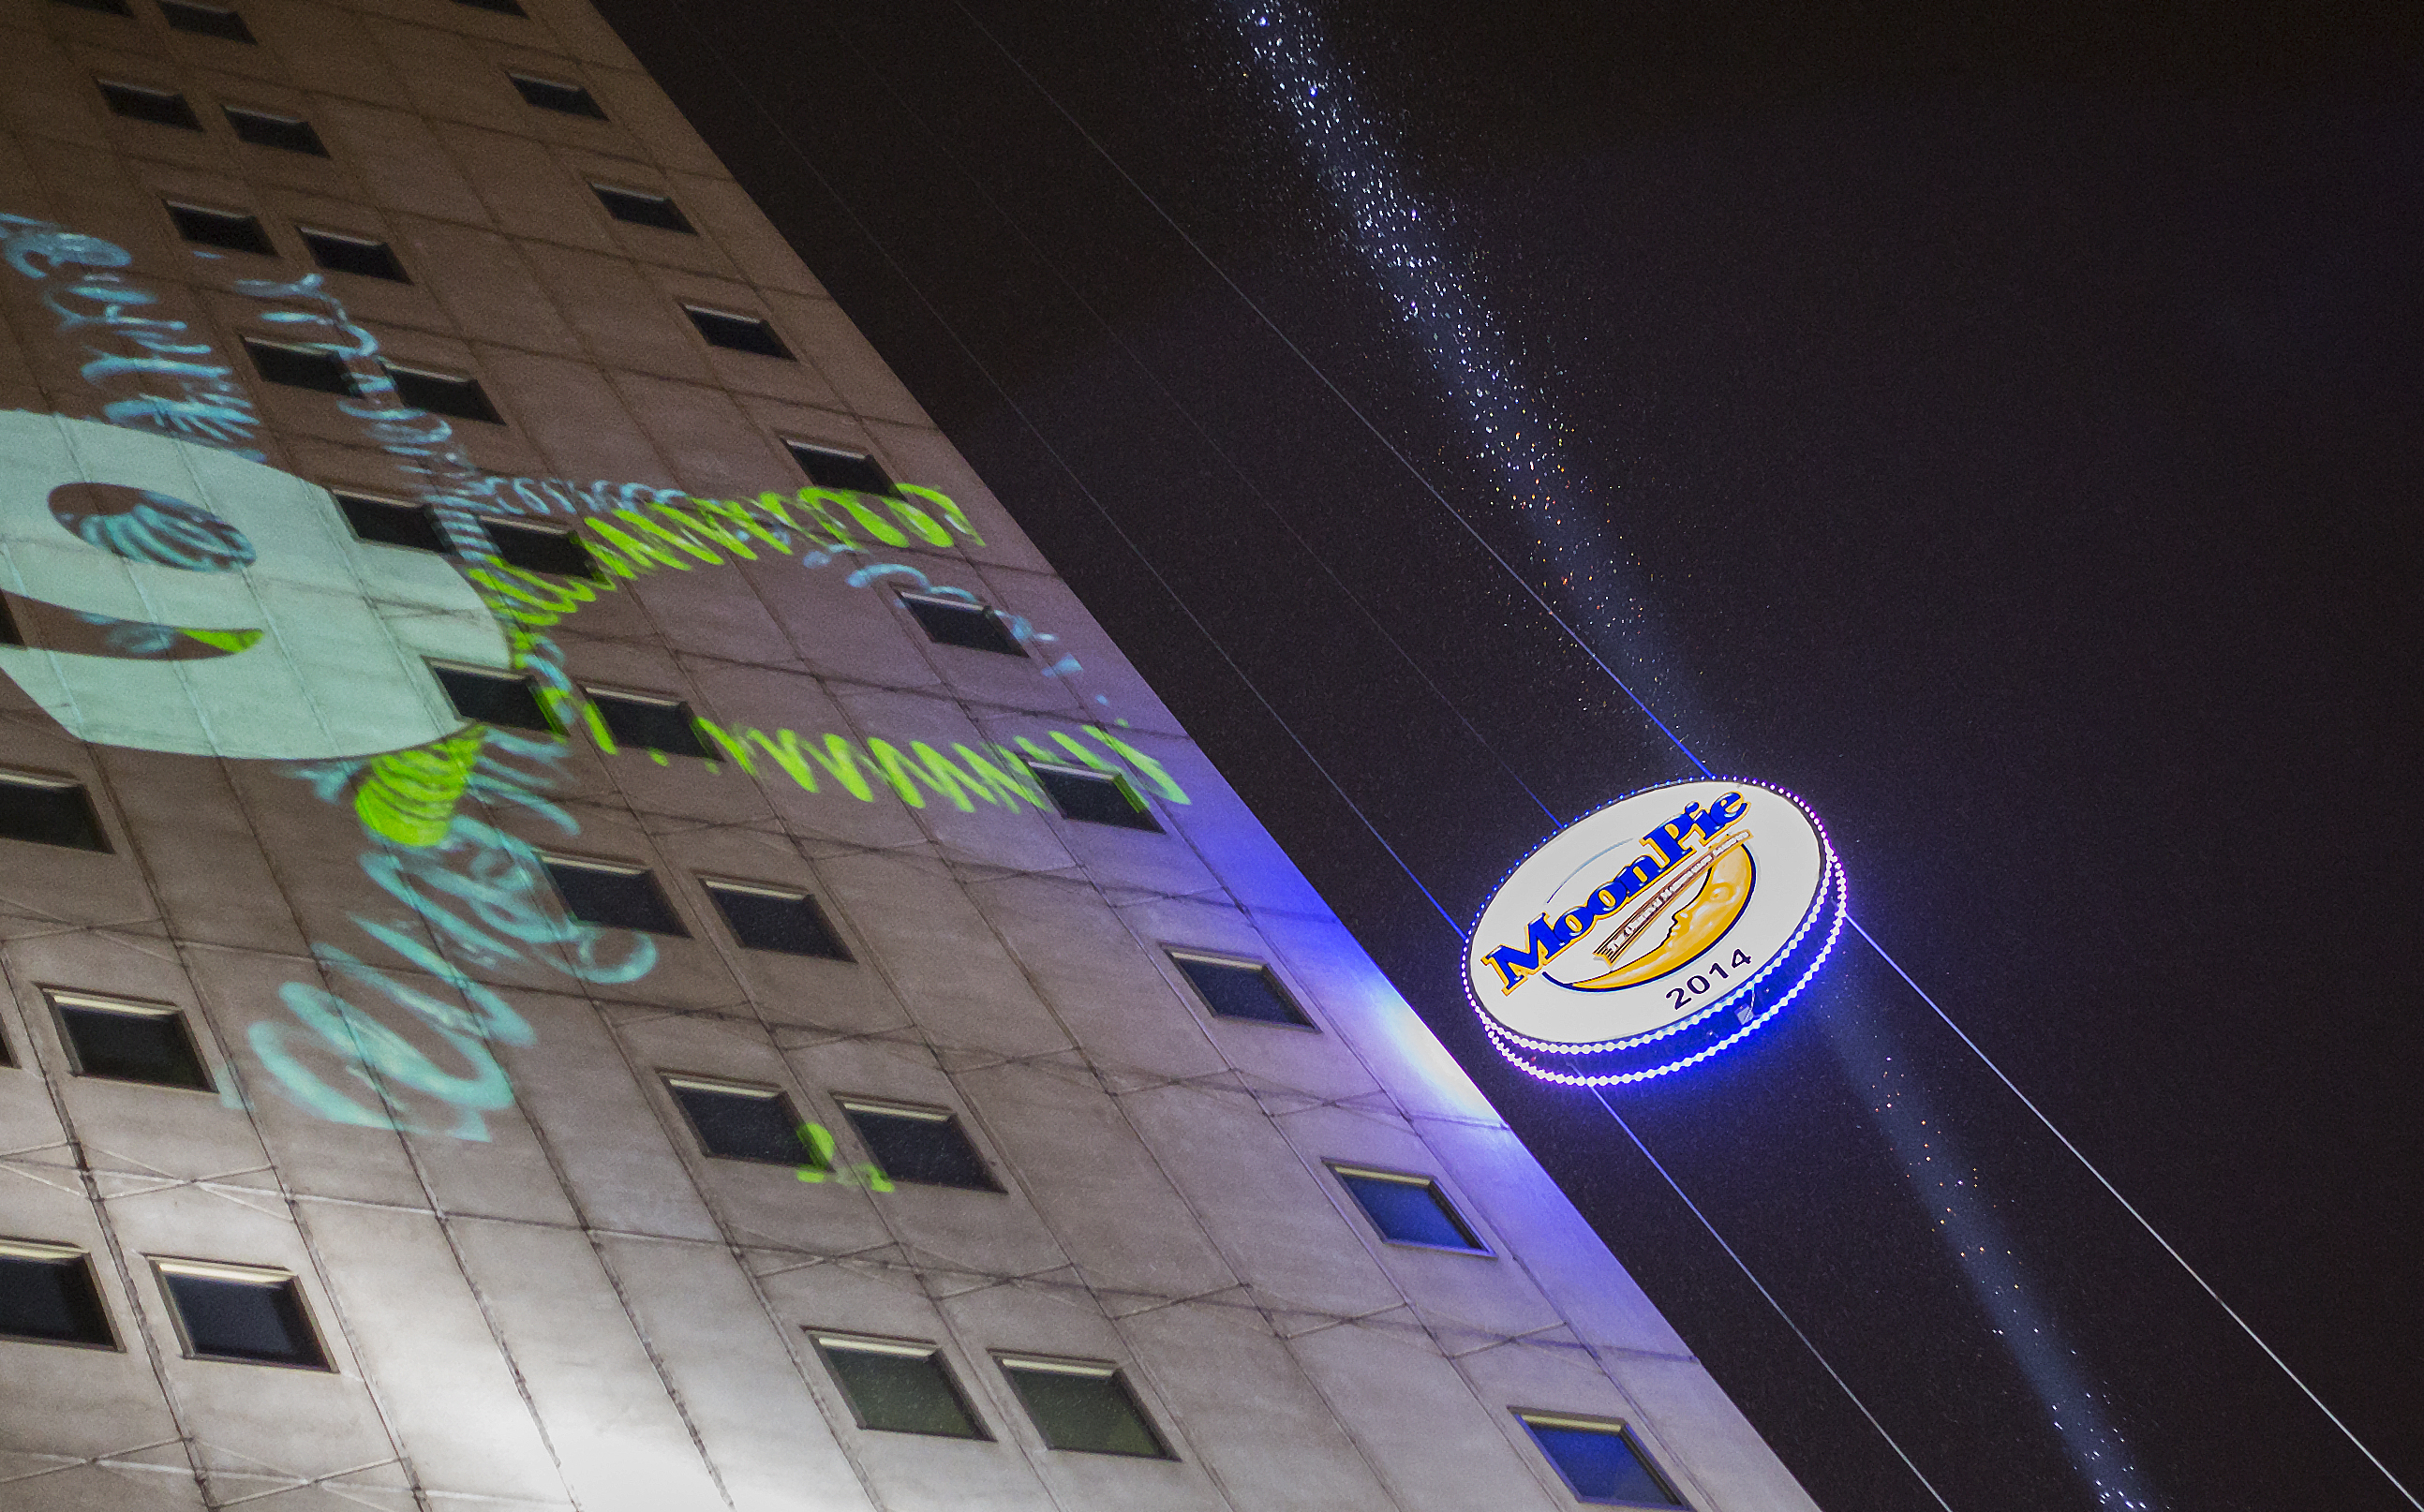 PHOTO: A large, illuminated Moon Pie descends from the RSA BankTrust Building during the Moon Pie Over Mobile New Year's Eve Celebration welcoming the arrival of 2014 in downtown Mobile, Ala.